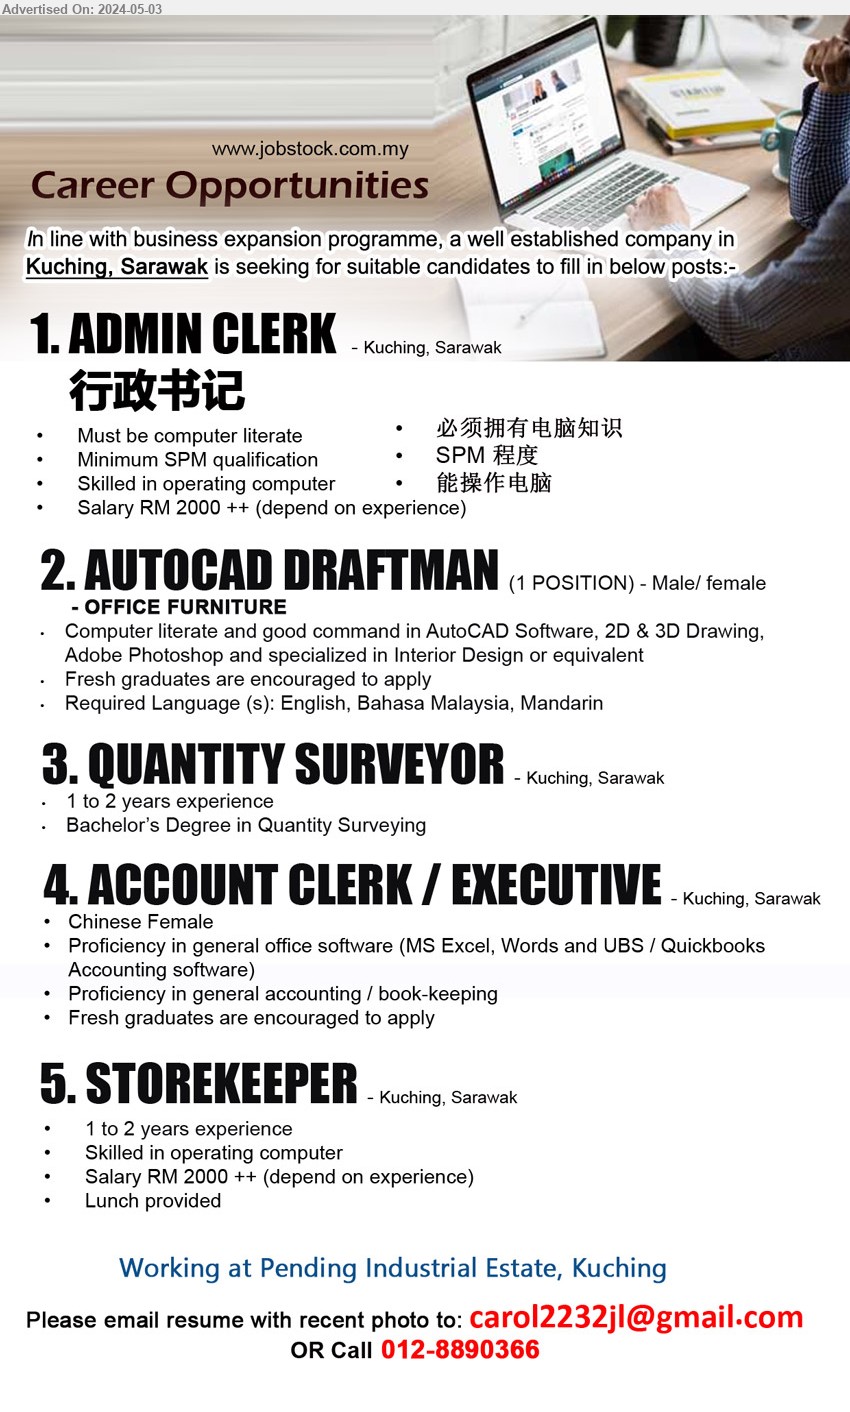 ADVERTISER - 1. ADMIN CLERK 行政书记  (Kuching), SPM, Must be computer literate, RM 2000++ (Depend on exp.)...
2. AUTOCAD DRAFTMAN (Kuching), Computer literate and good command in AutoCAD Software, 2D & 3D Drawing, Adobe Photoshop and specialized in Interior Design,...
3. QUANTITY SURVEYOR (Kuching), Bachelor’s Degree in Quantity Surveying,...
4. ACCOUNT CLERK/EXECUTIVE (Kuching), Proficiency in general office software (MS Excel, Words and UBS / Quickbooks Accounting software),...
5. STOREKEEPER (Kuching), RM 20000++ (Depend on exp.), 1-2 yrs. exp., lunch provided,...
Call 012-8890366 / Email resume to ...